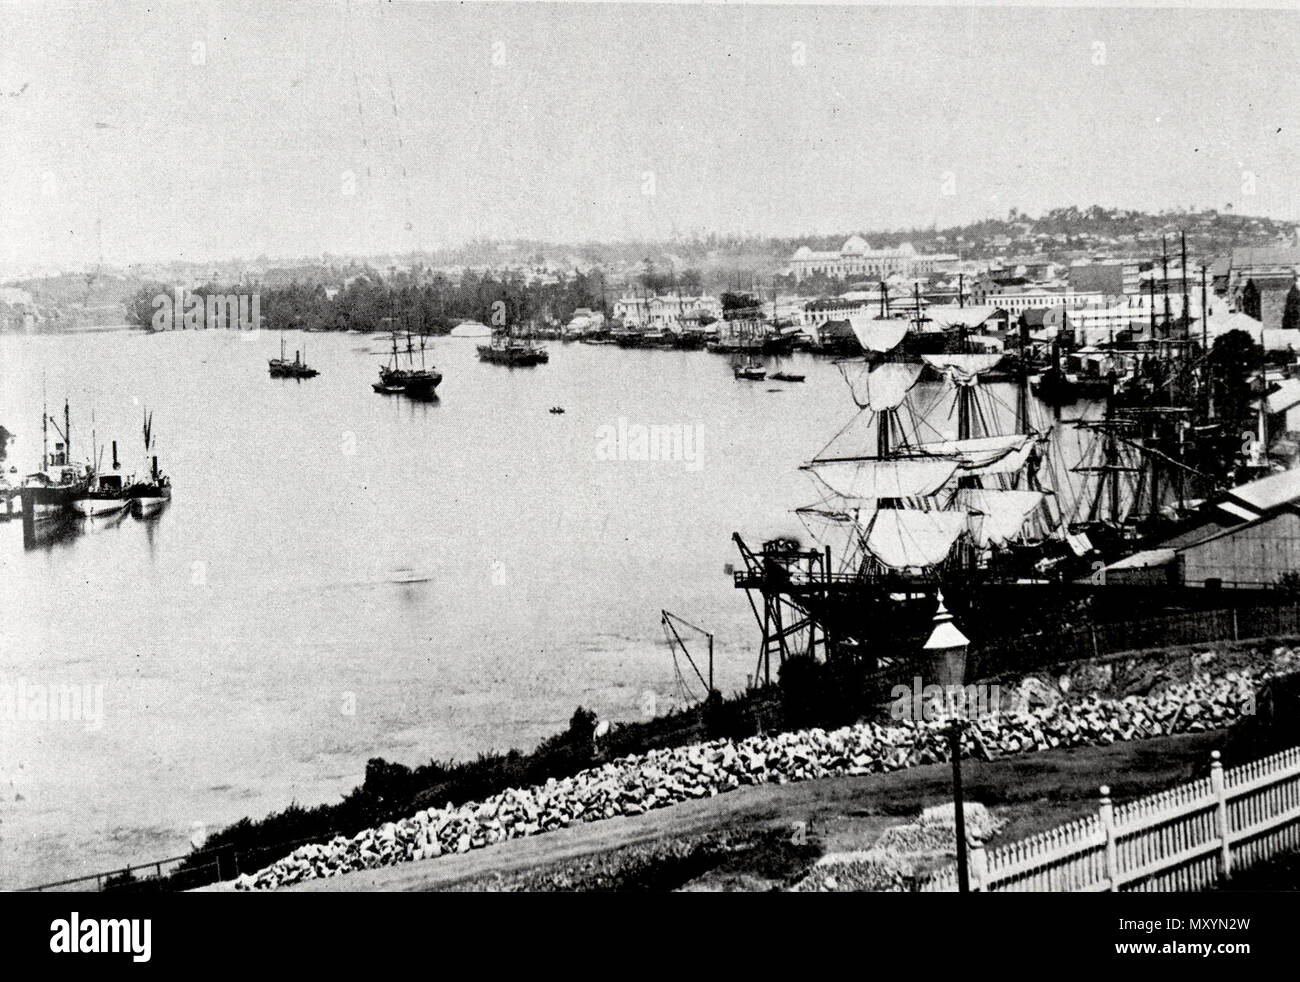 Looking along the Brisbane River in 1885. The Brisbane Courier Mon 17 Aug 1885  Sailing Matters By Tell Tale  The number of pleasure sailing boats on the Brisbane River is rapidly on the increase. The lastest addition of this kind is a handy little craft just turned out for Mr. Marlow by Mr. Miller, of Kangaroo Point. The Cecilia - the name given to her - is an 18ft. open centreboard boat, of nearly 6ft. beam. She is planked with cedar, on yellow-wood timbers, is varnished, and looks a neat and well-modelled craft, which ought to be both comfortable and fast under canvas.   The summer winds ar Stock Photo